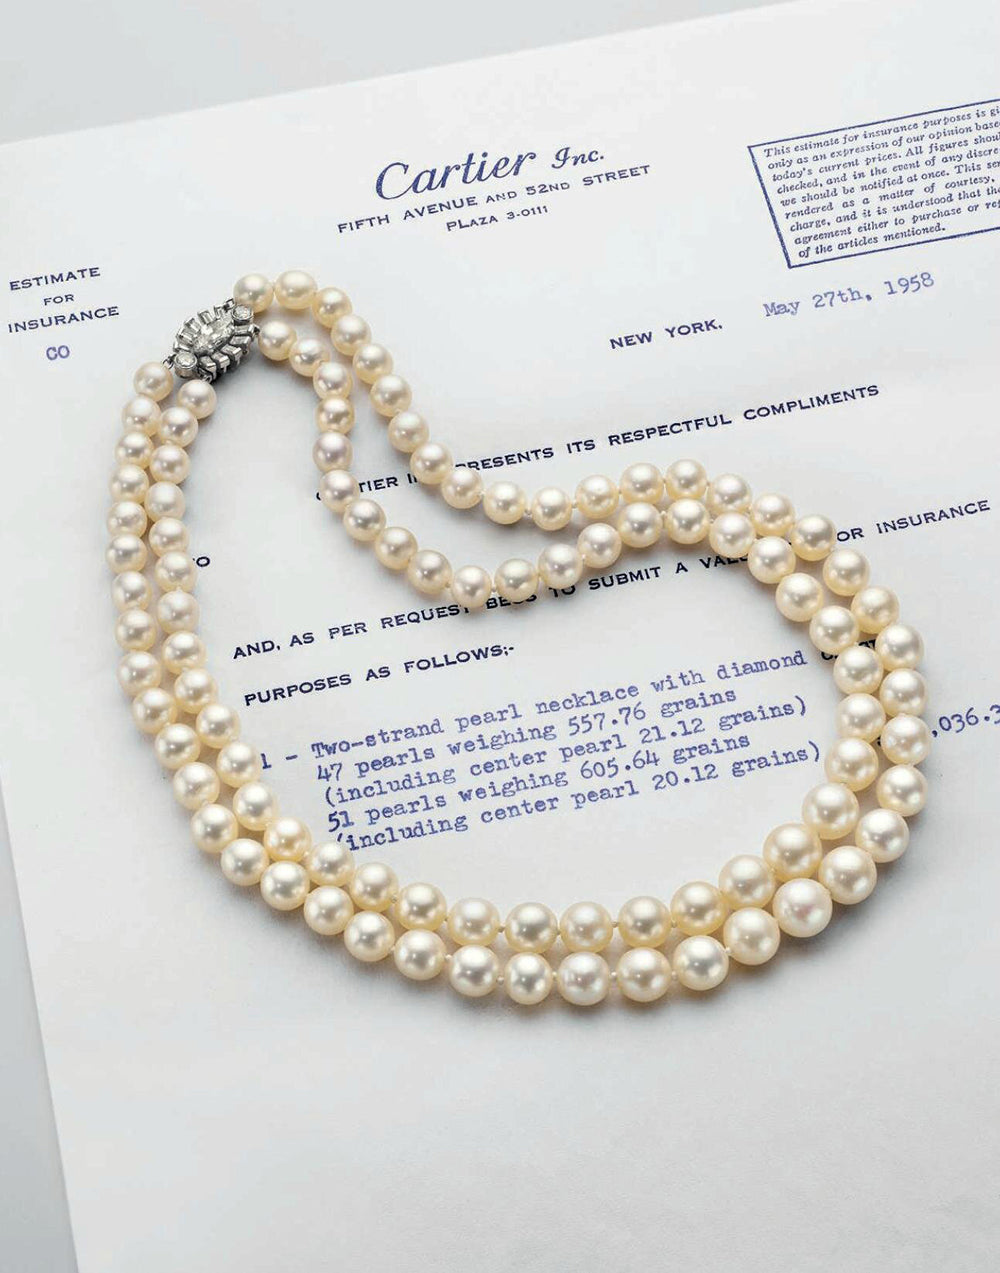 Top Ten Most Expensive Pearls Ever Sold: Cartier Double Strand Natural Pearl Necklace